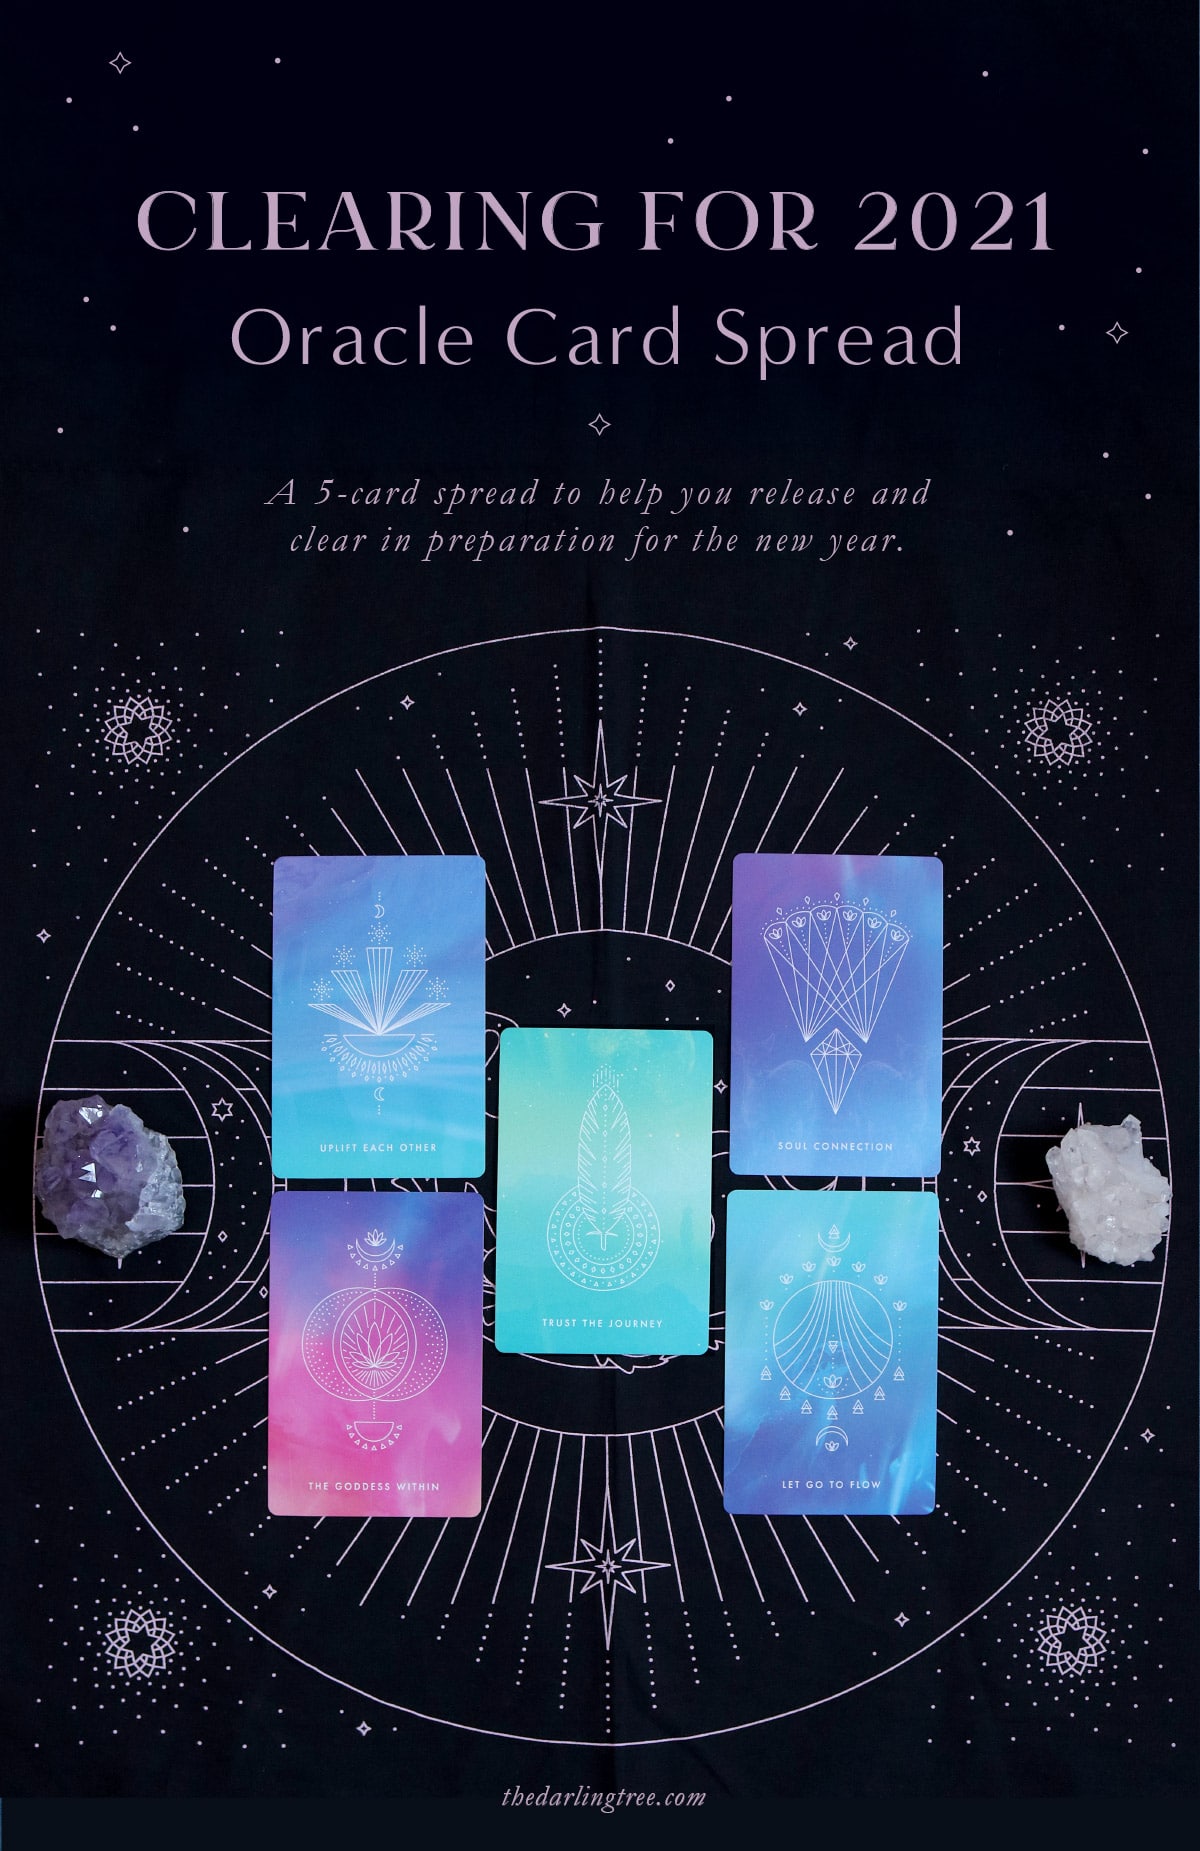 A 5-card spread to help you release and clear in preparation for the new year.